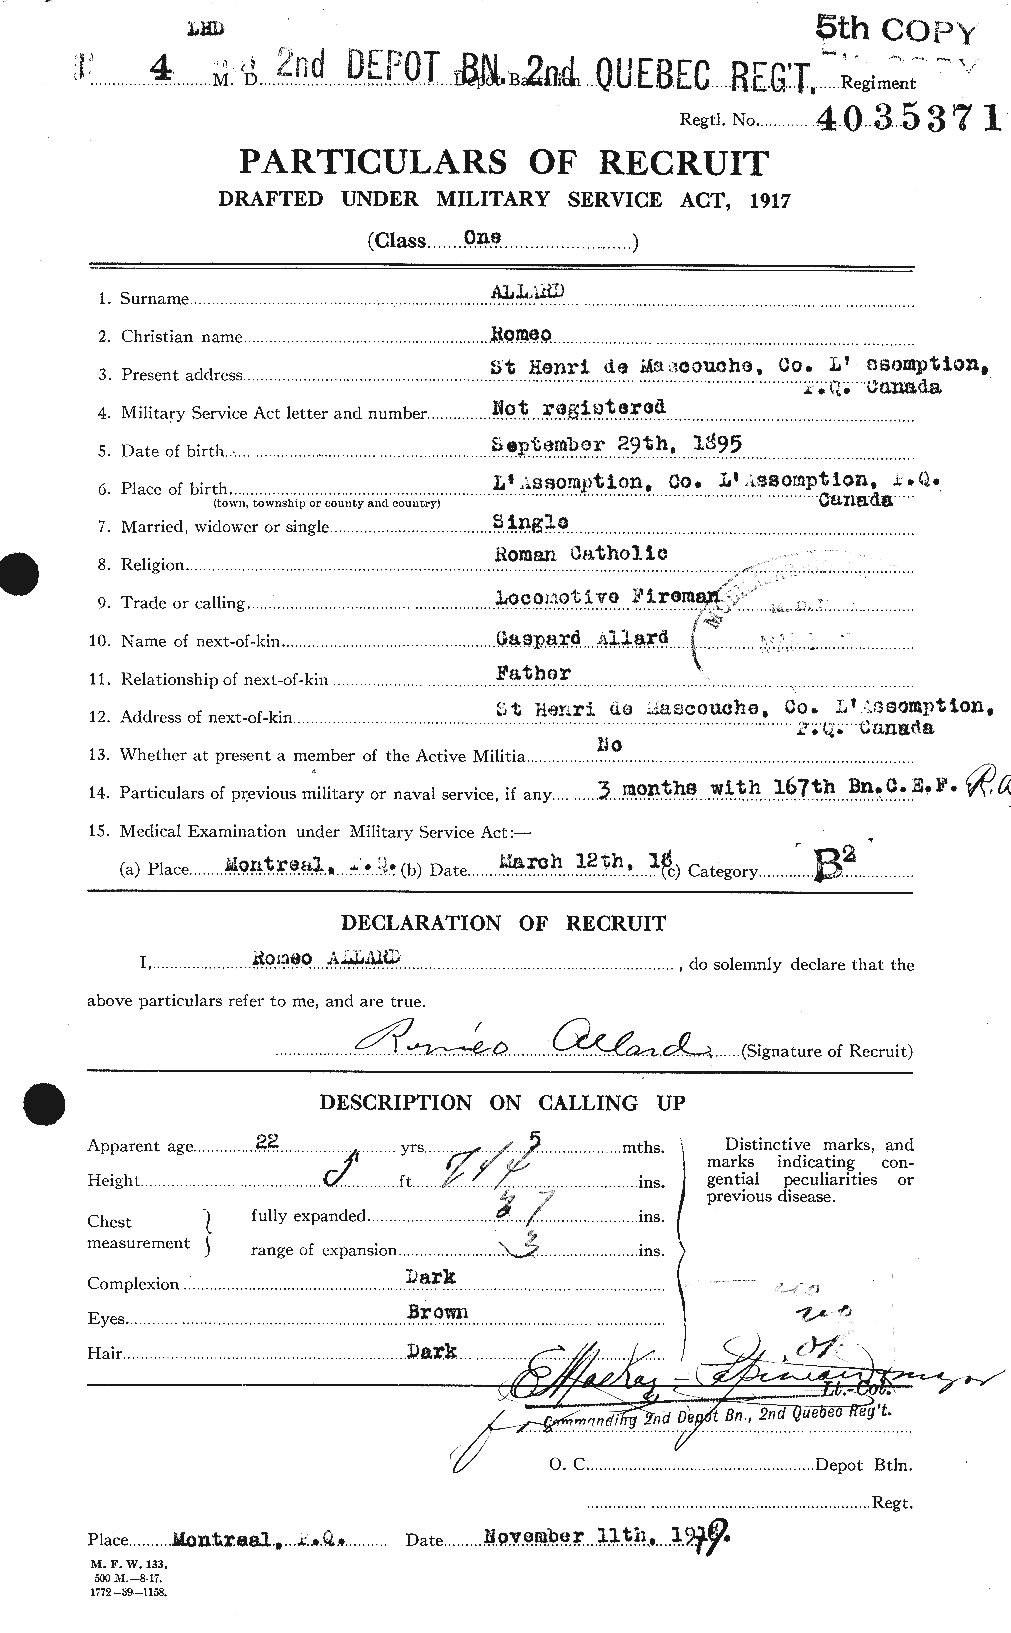 Personnel Records of the First World War - CEF 205617a